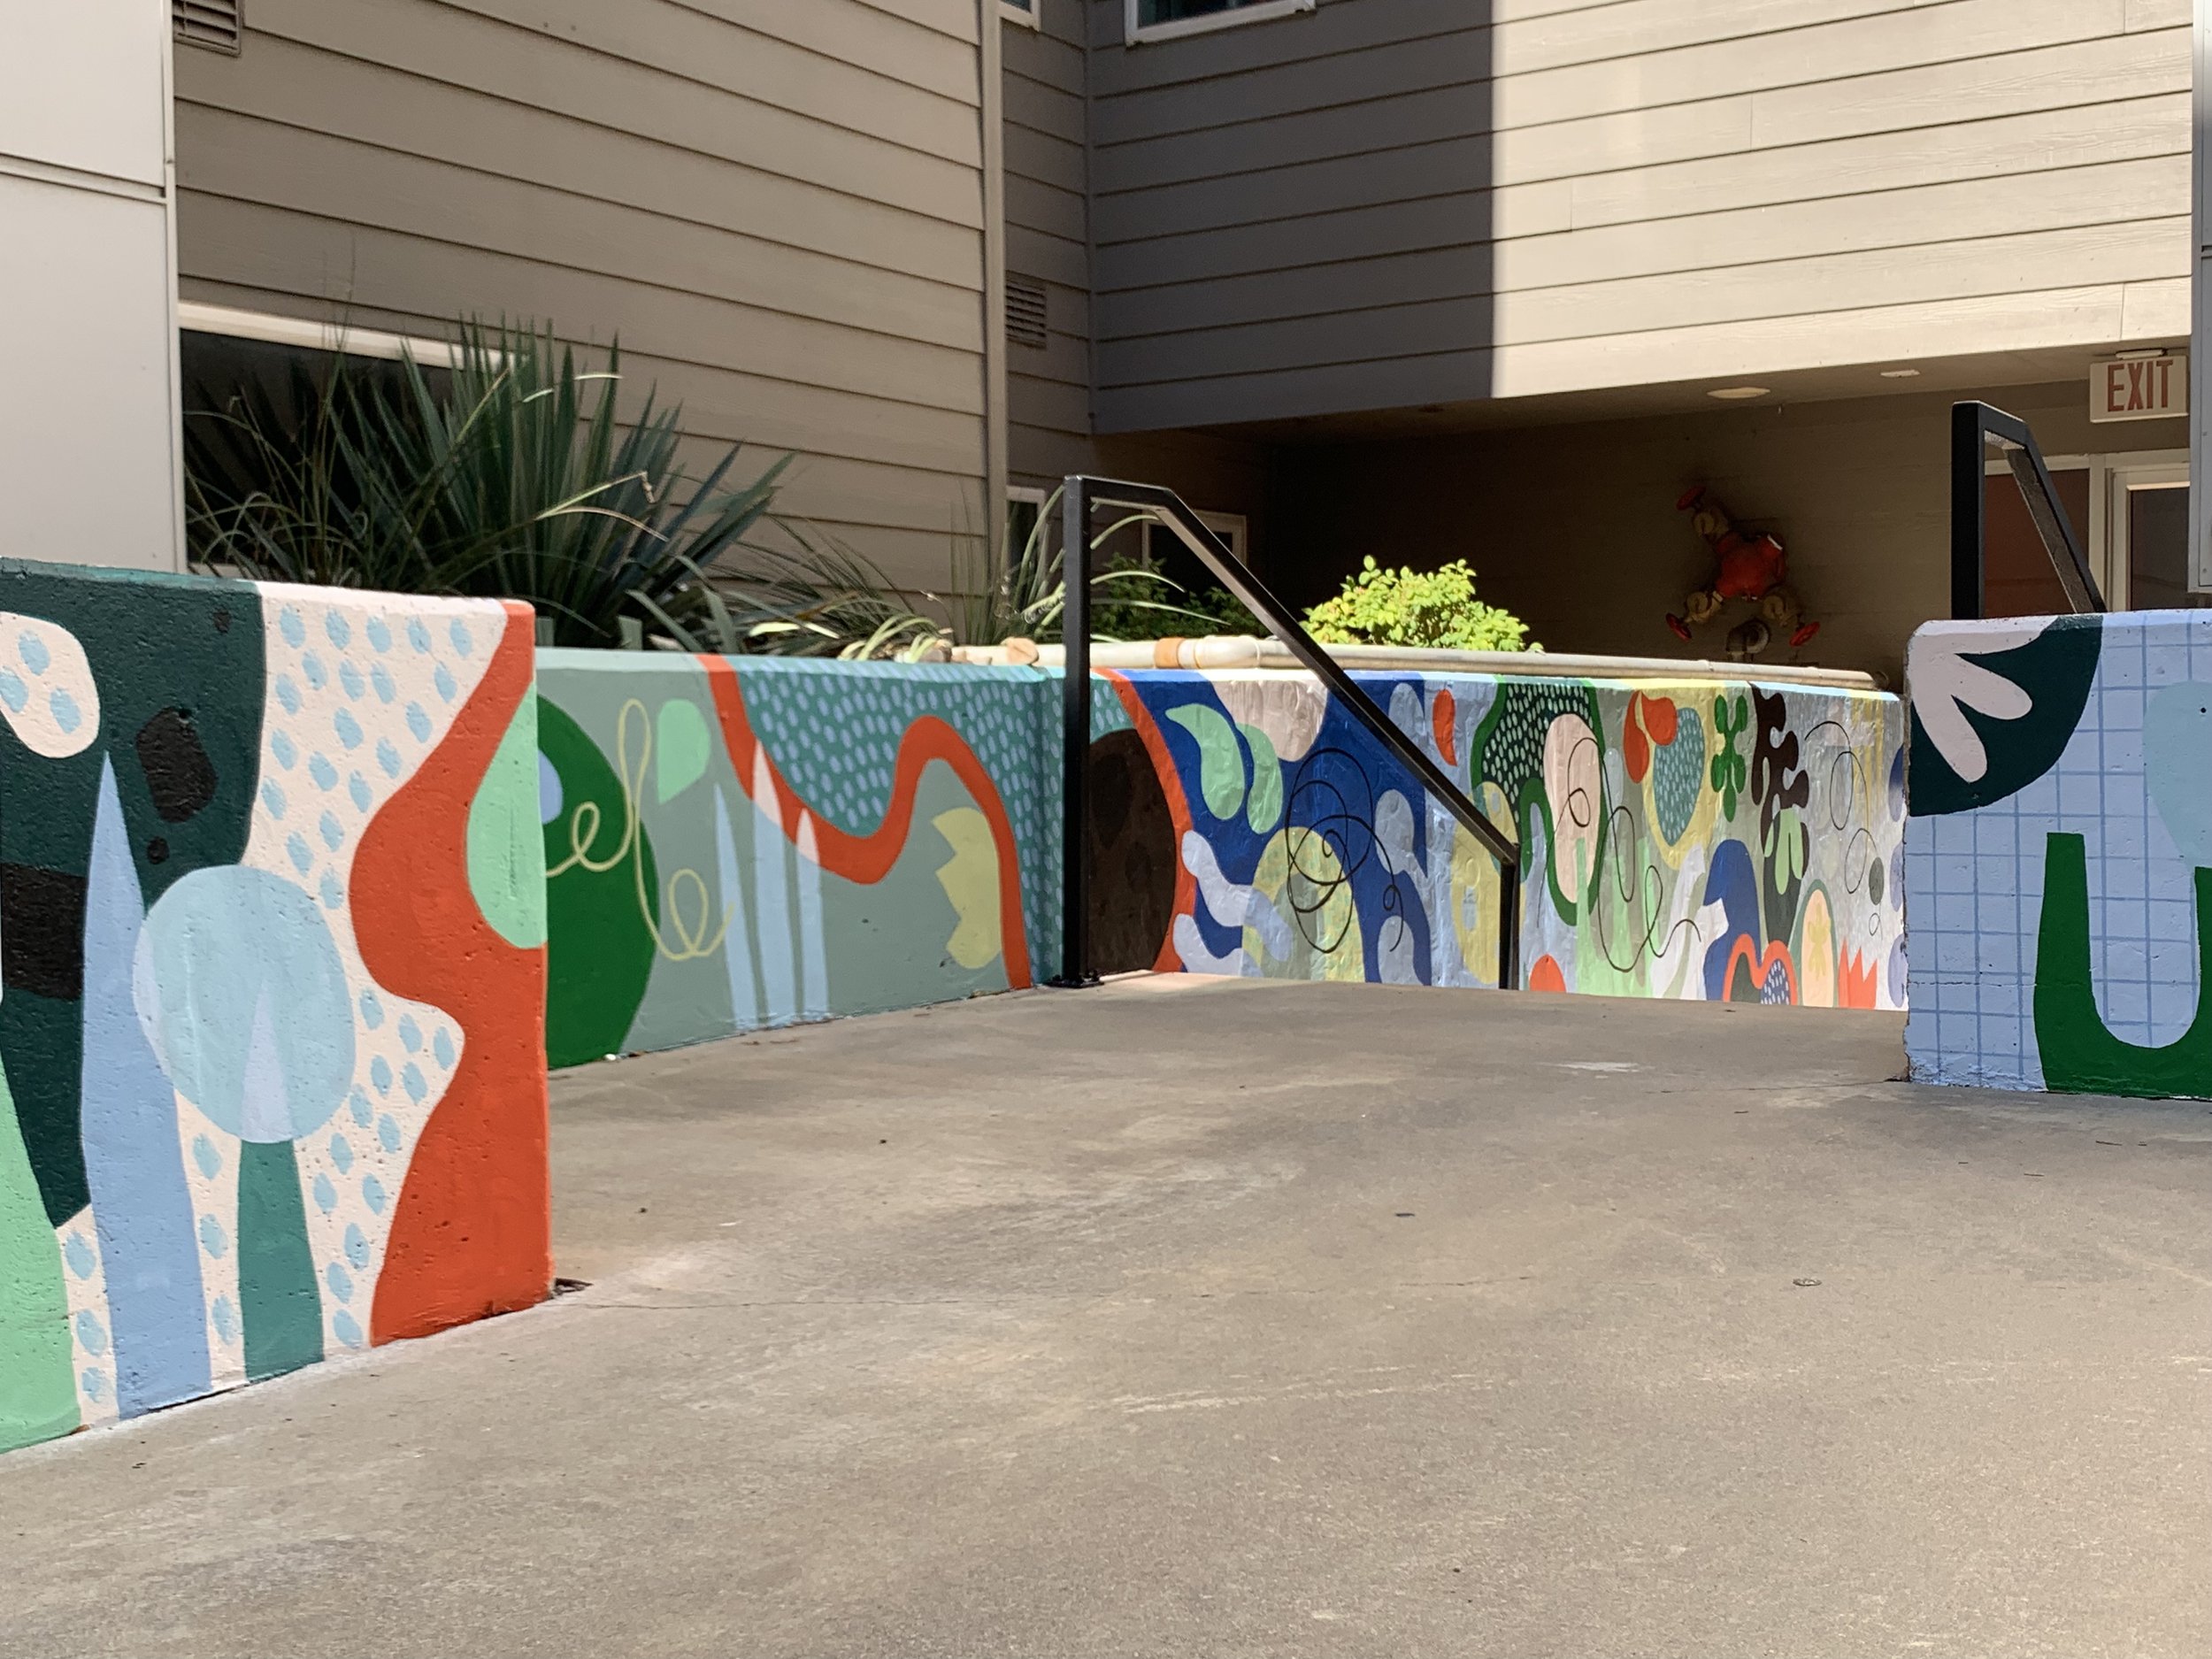  mural painting for Prime Place Apartments in Stillwater, Oklahoma2022 